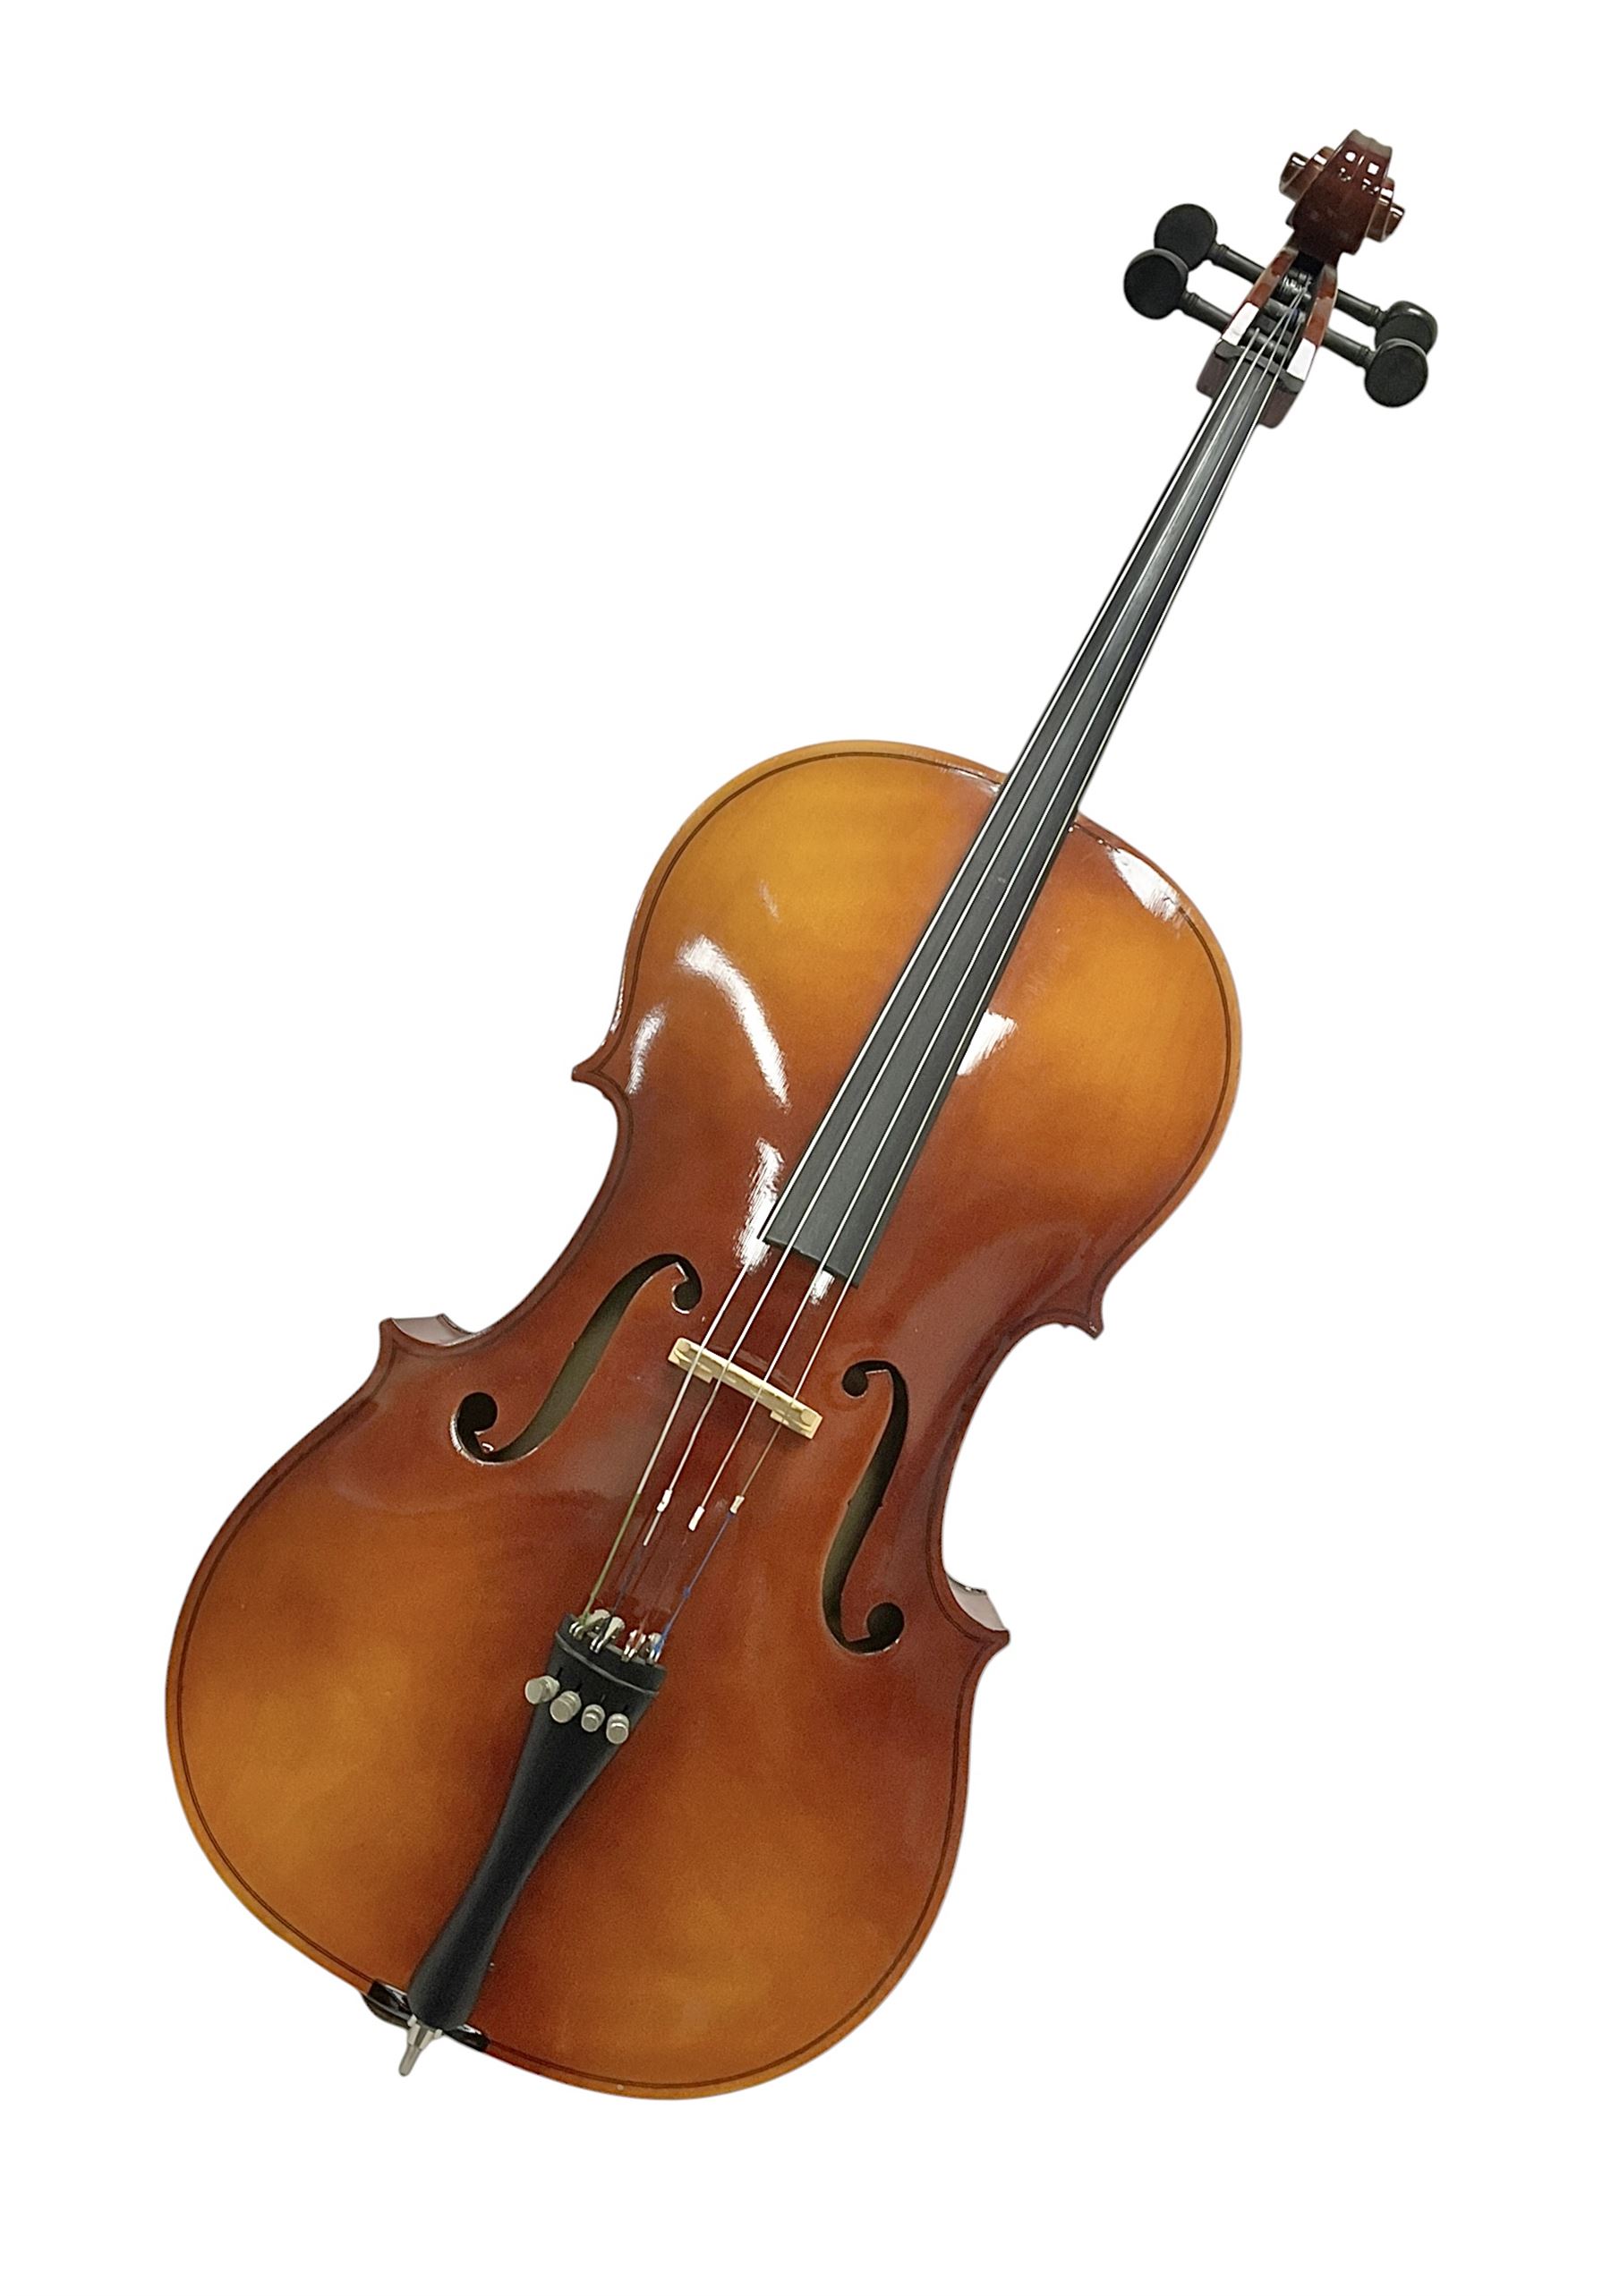 3/4 size student cello manufactured in Czechoslovakia